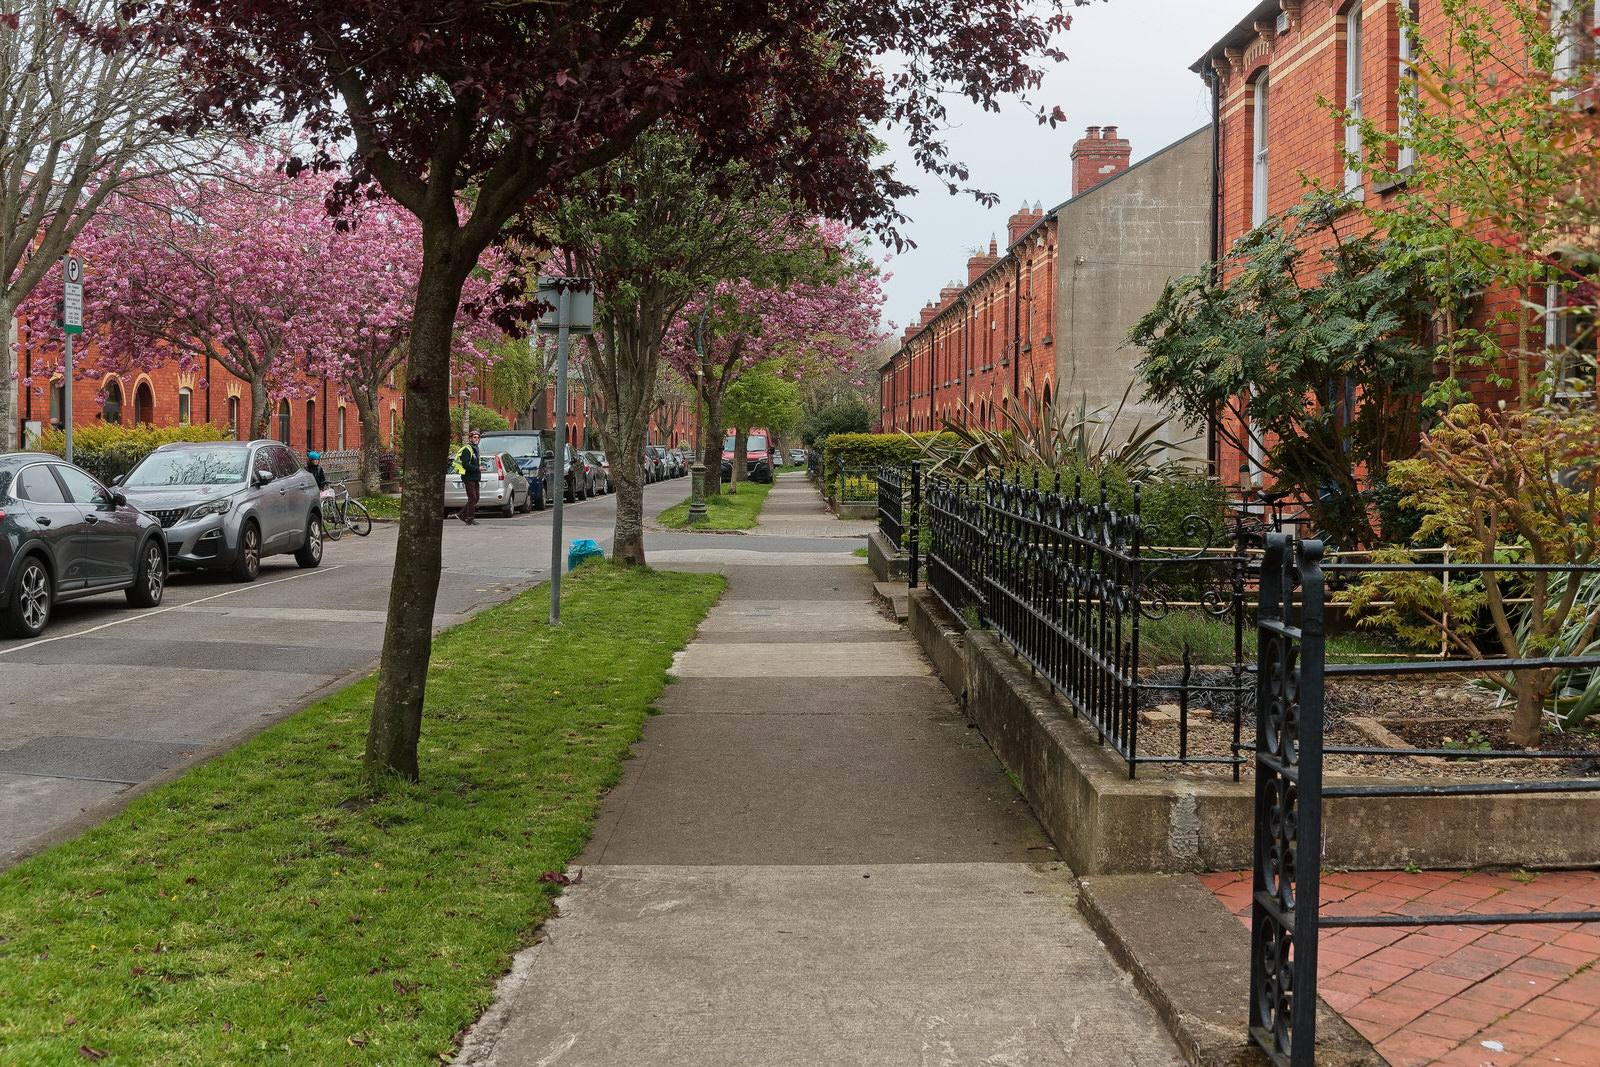 THE SHANDON AREA OF DUBLIN NEAR THE ROYAL CANAL AND THE CABRA TRAM STOP